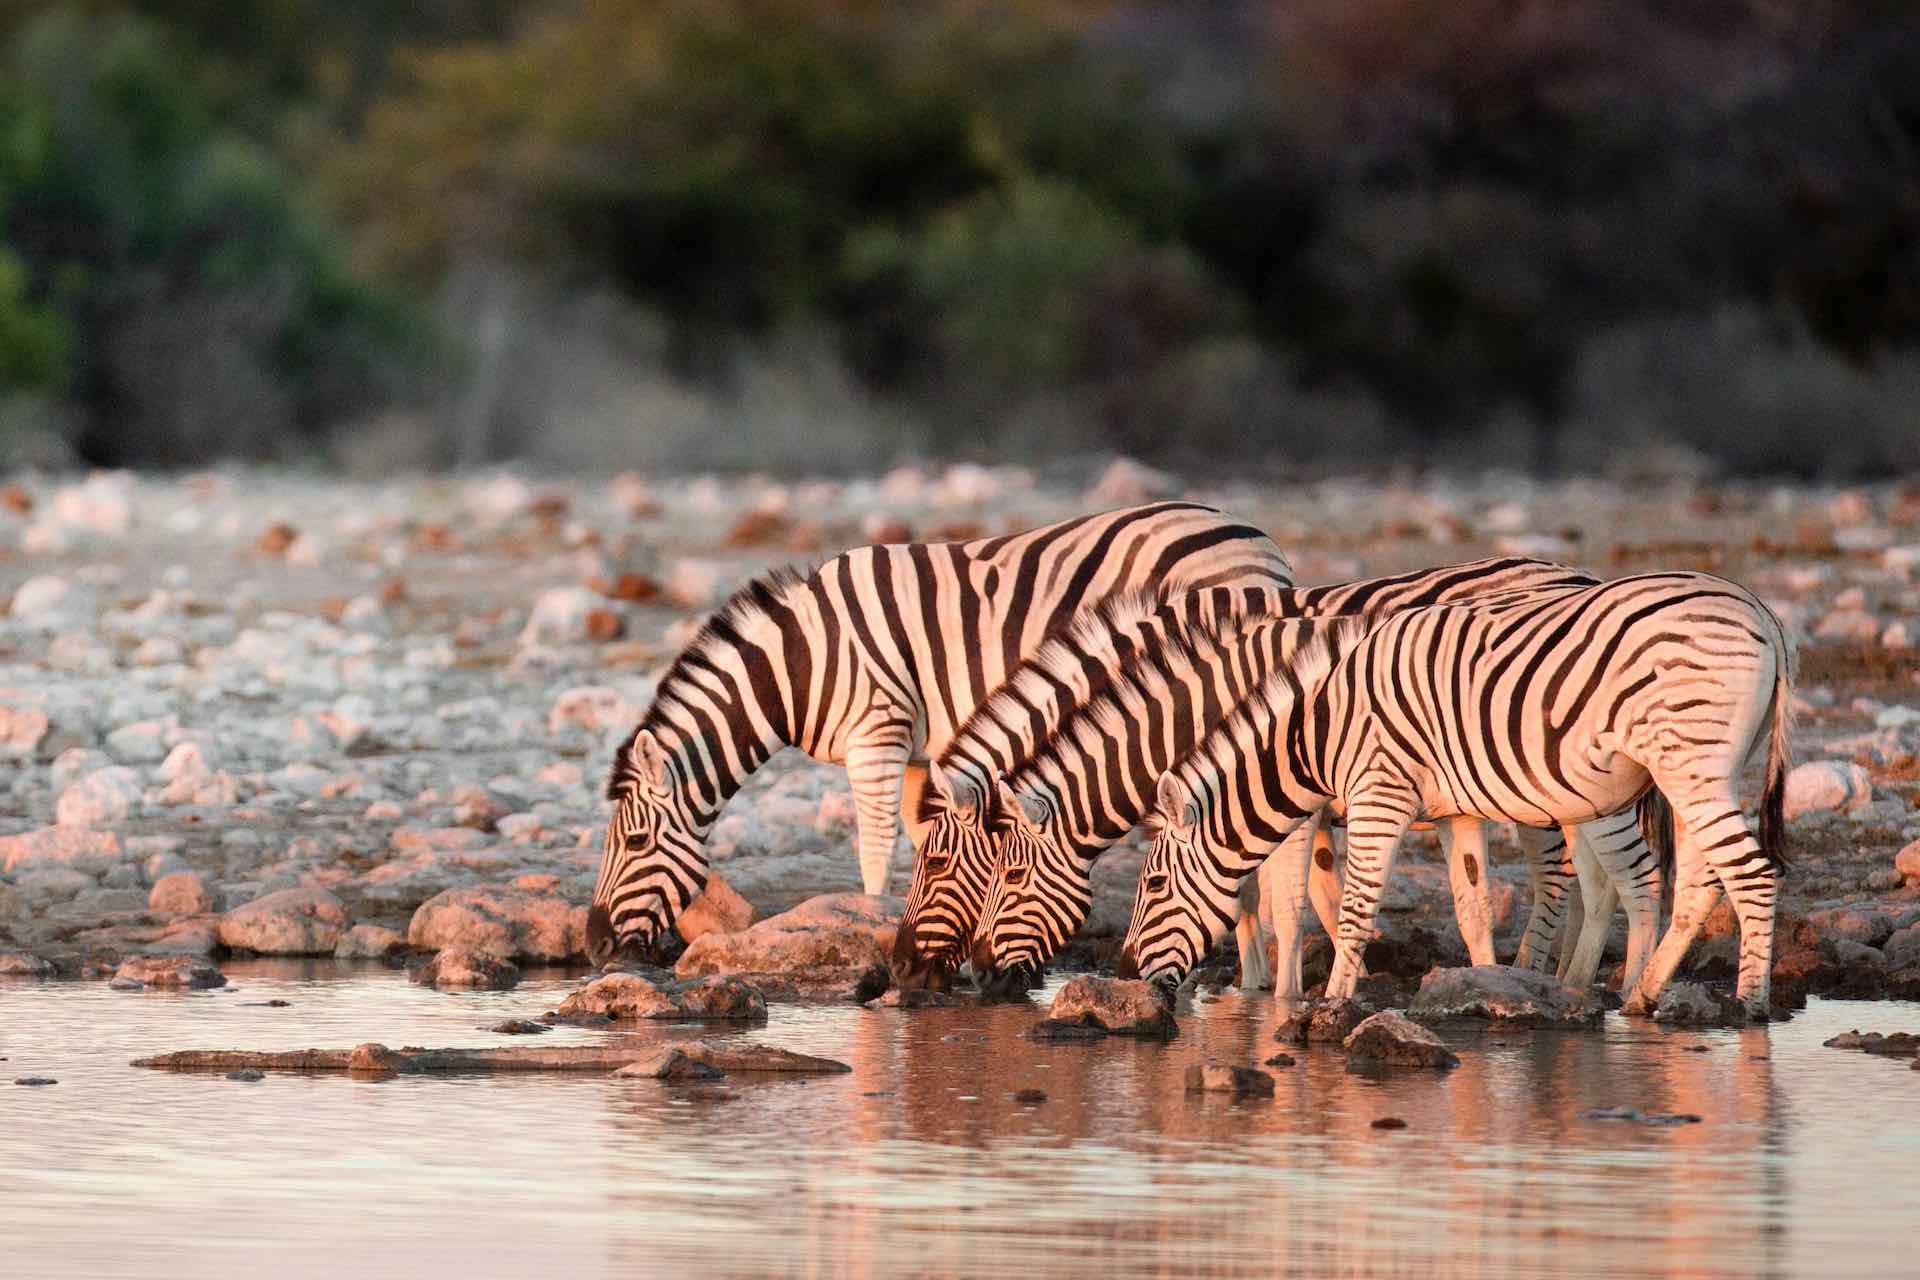 Four zebras drinking water from a river. Wildlife photography.